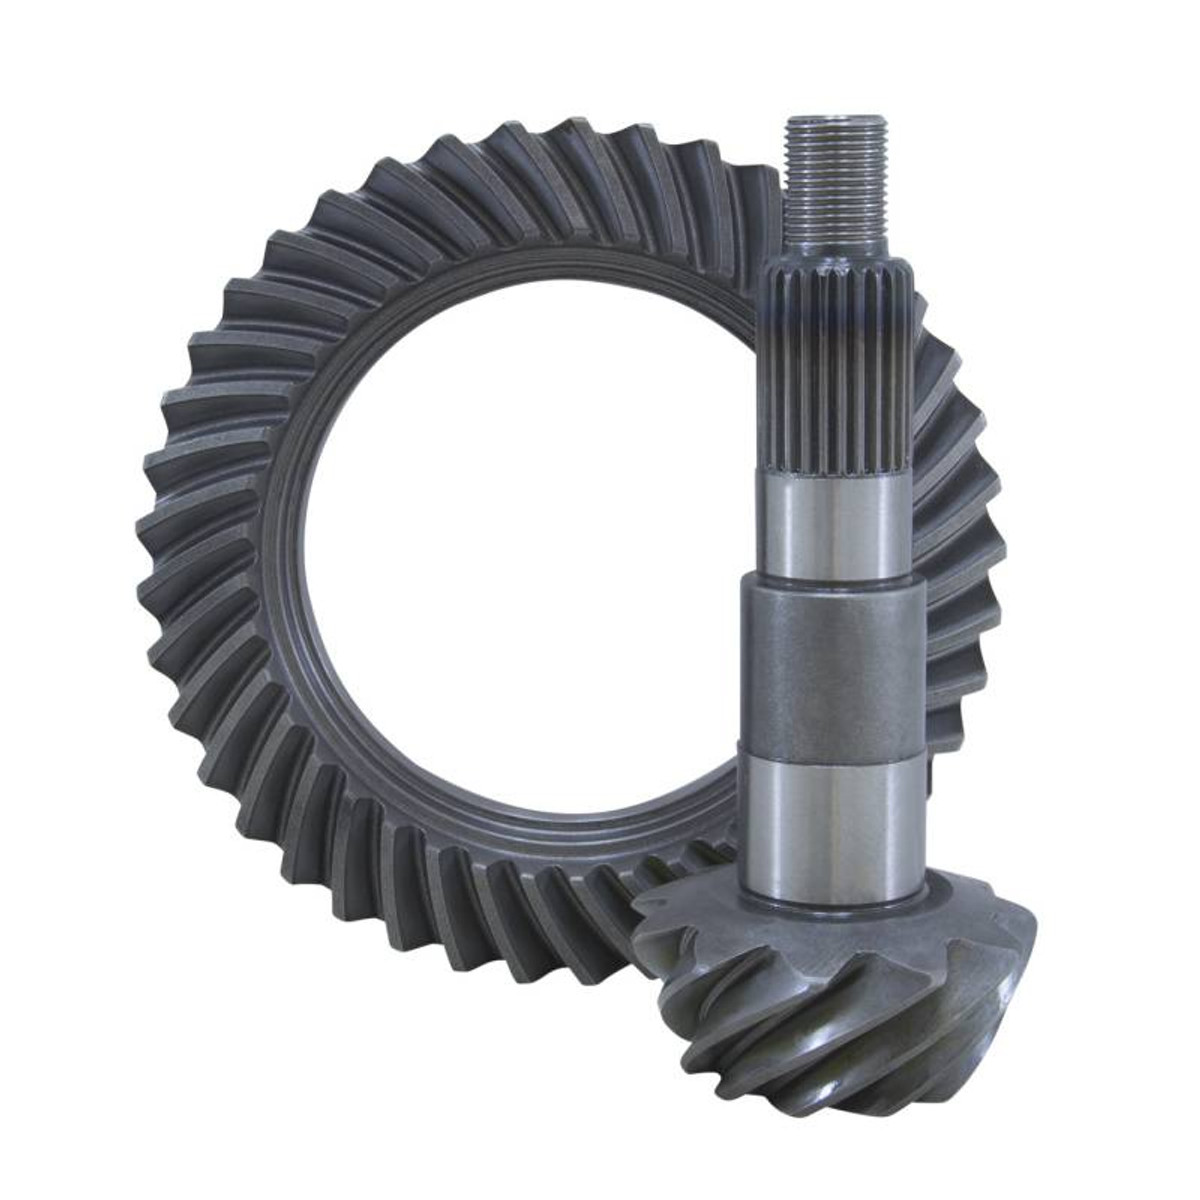 High Performance Yukon Ring And Pinion Replacement Gear Set For Dana 30 Reverse Rotation In A 4.88 Ratio YG D30R-488R